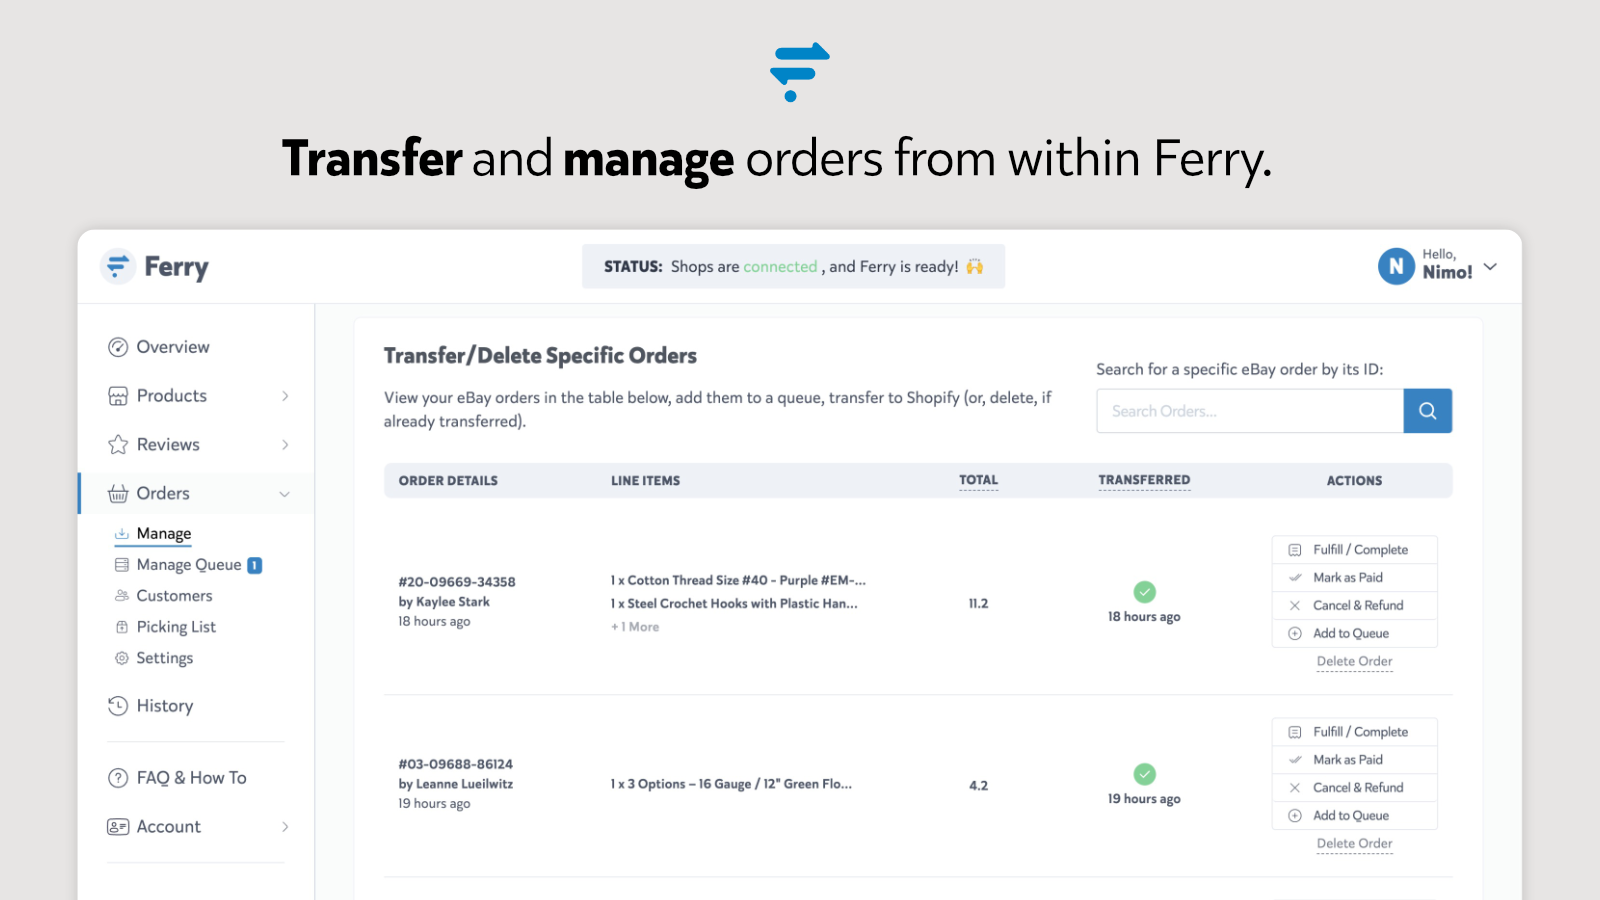 Transfer and manage orders from within Ferry